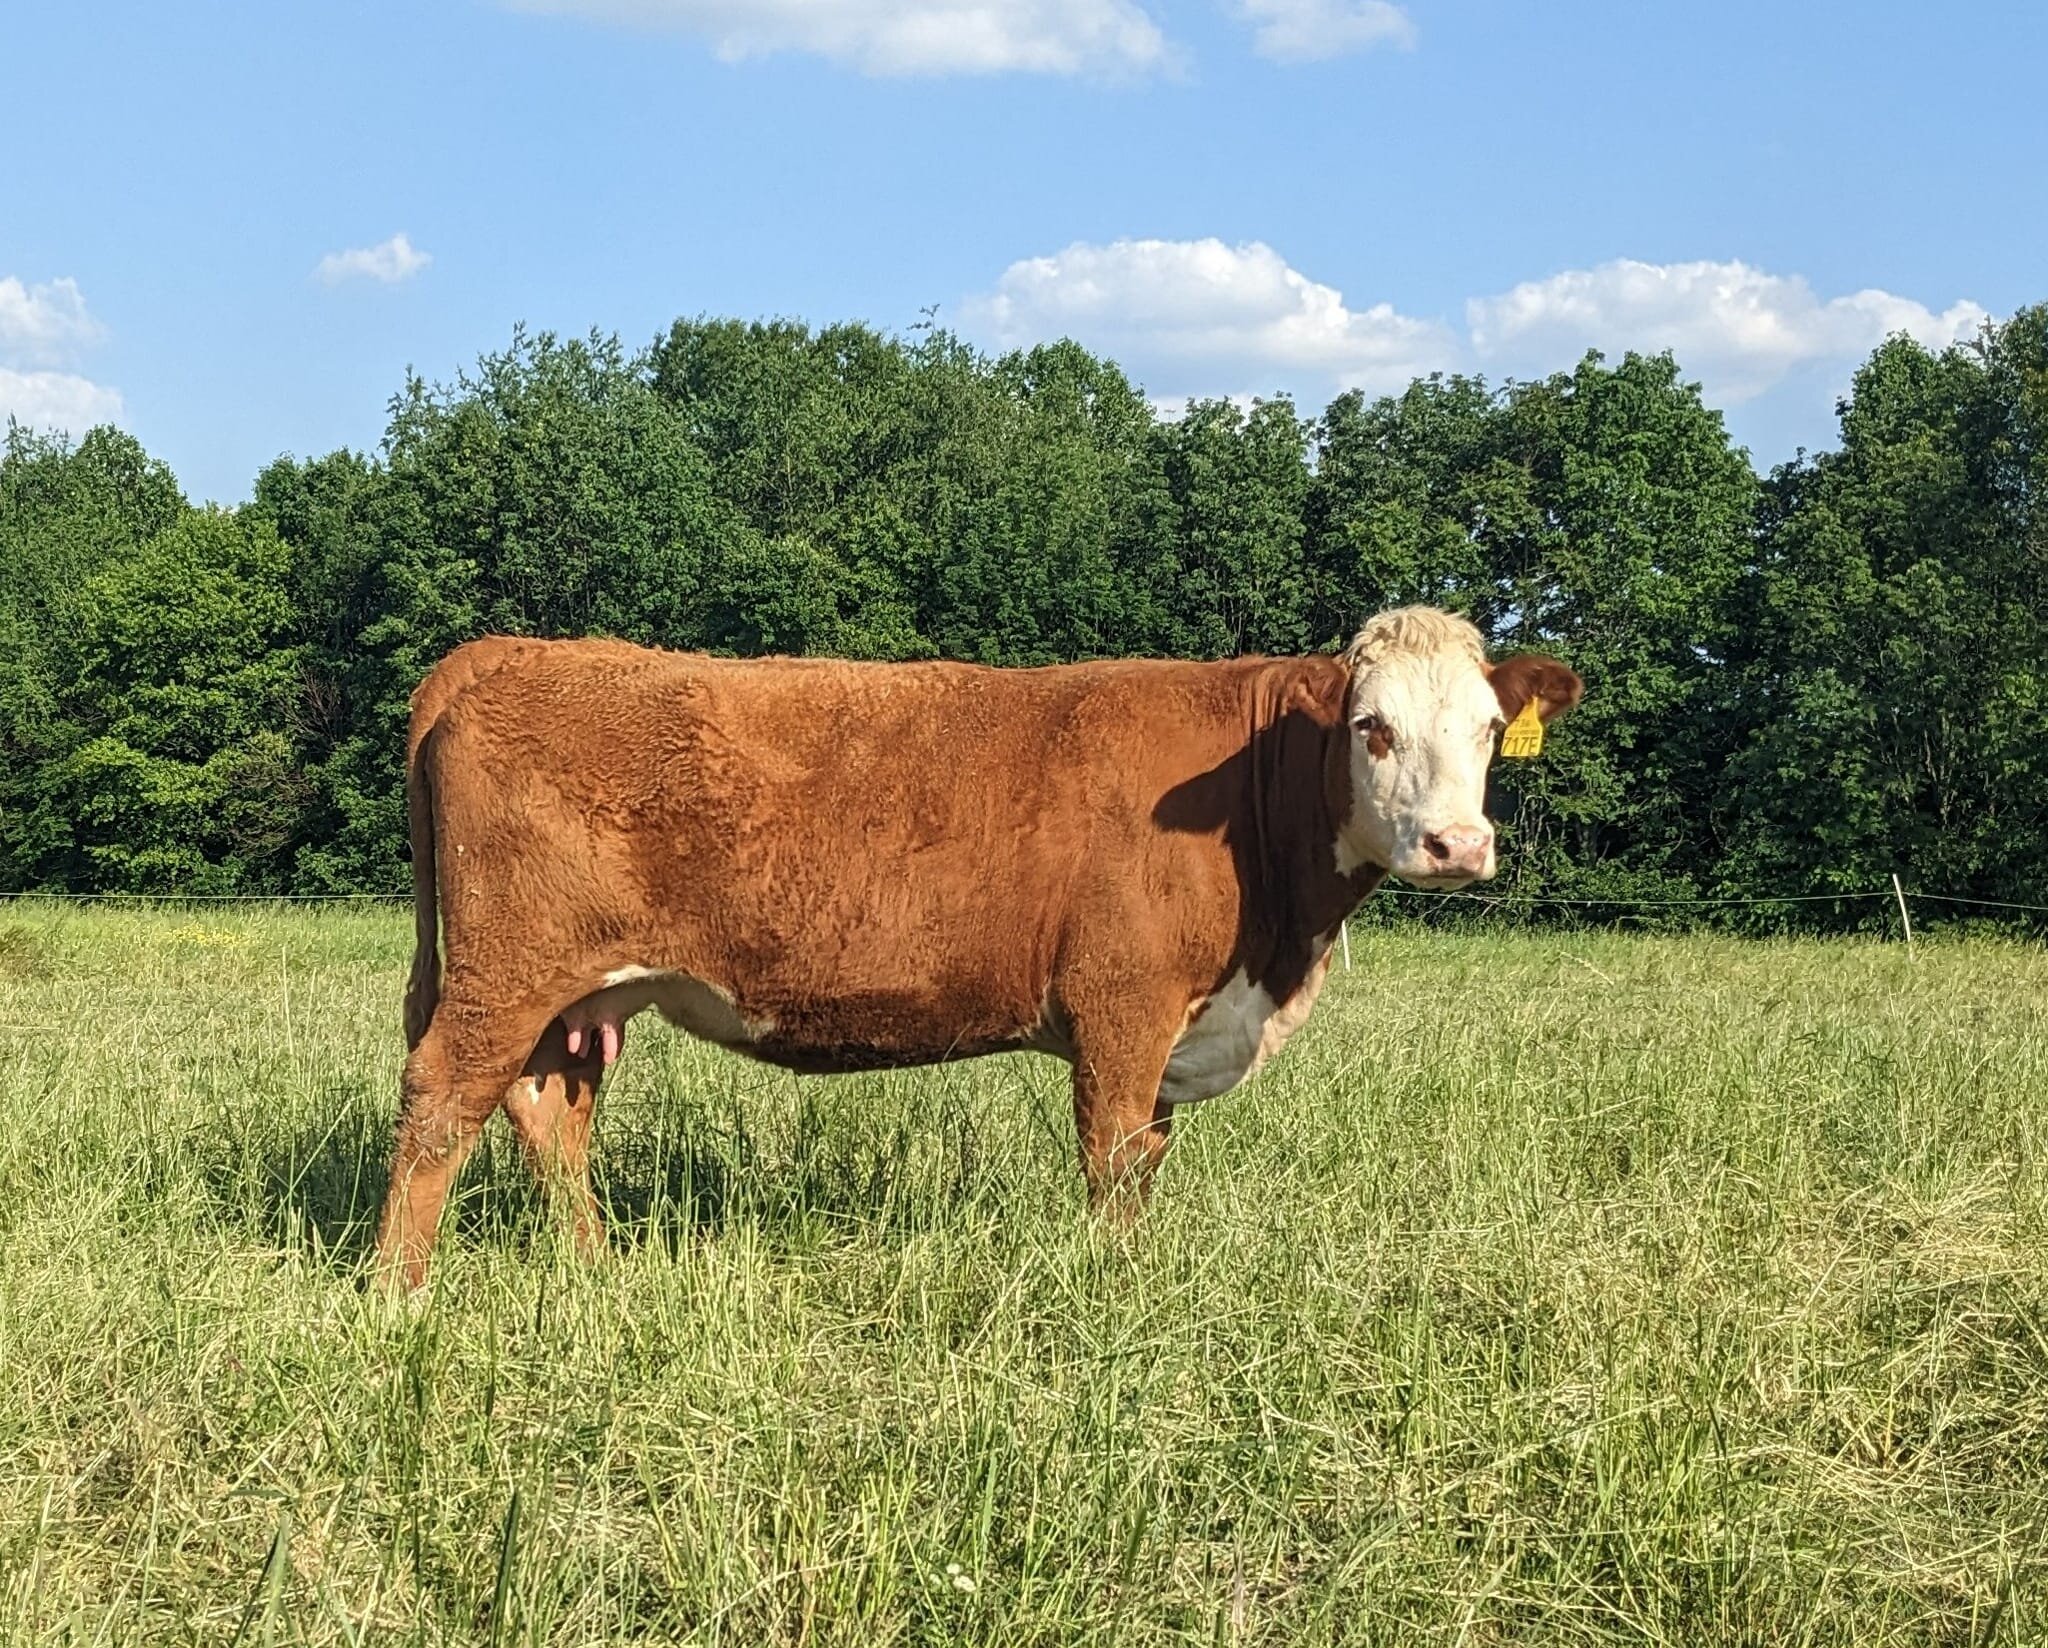 717E is one of the cows in a group that we have for sale. She has a nice daughter of HH ADVANCE 3297A that we are keeping to replace her. Her 12 year old dam is still raising one of our best calves every year. Many generations of Coley Herefords behi